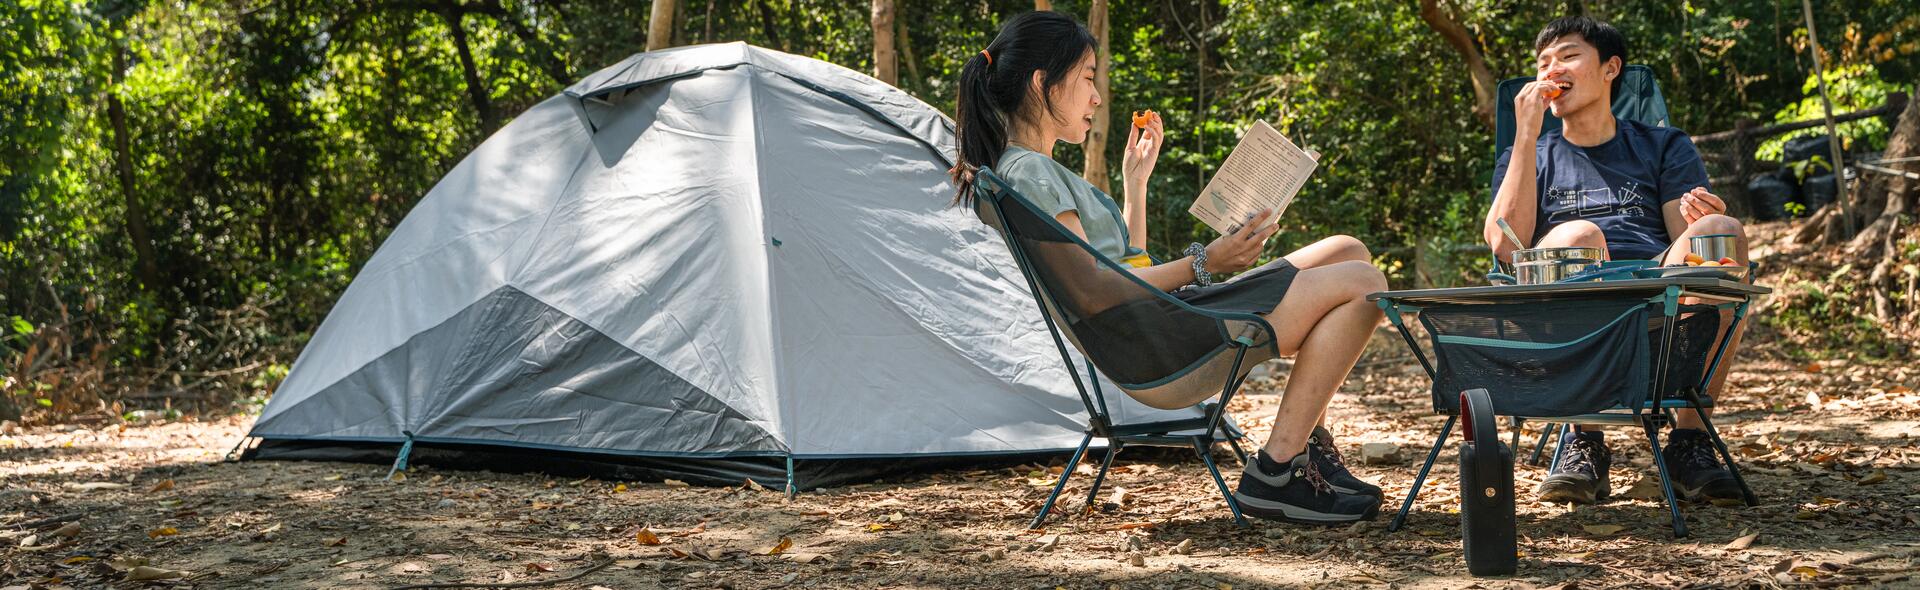 4 MUST-HAVE ITEMS OF CAMPING GEAR FOR THE SPRING & SUMMER SEASON!